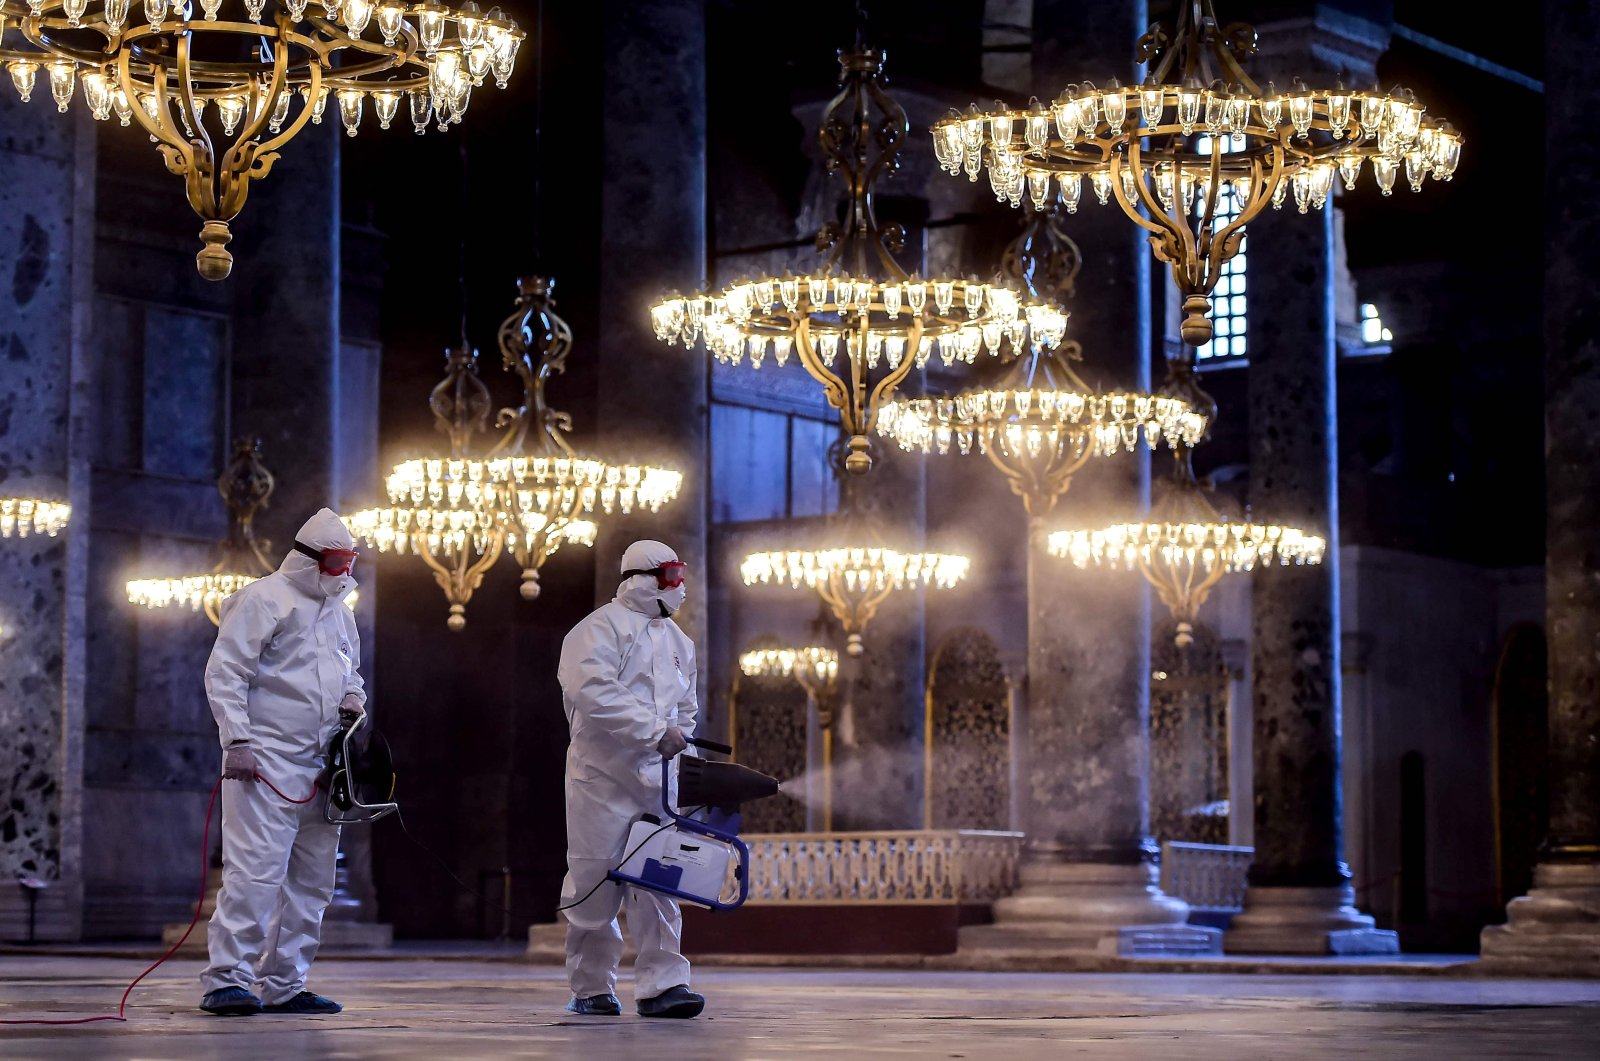 Employees of the Fatih Municipality wearing protective suits disinfect the Hagia Sophia to prevent the spread of the COVID-19, Istanbul, March 13, 2020. (AFP Photo)